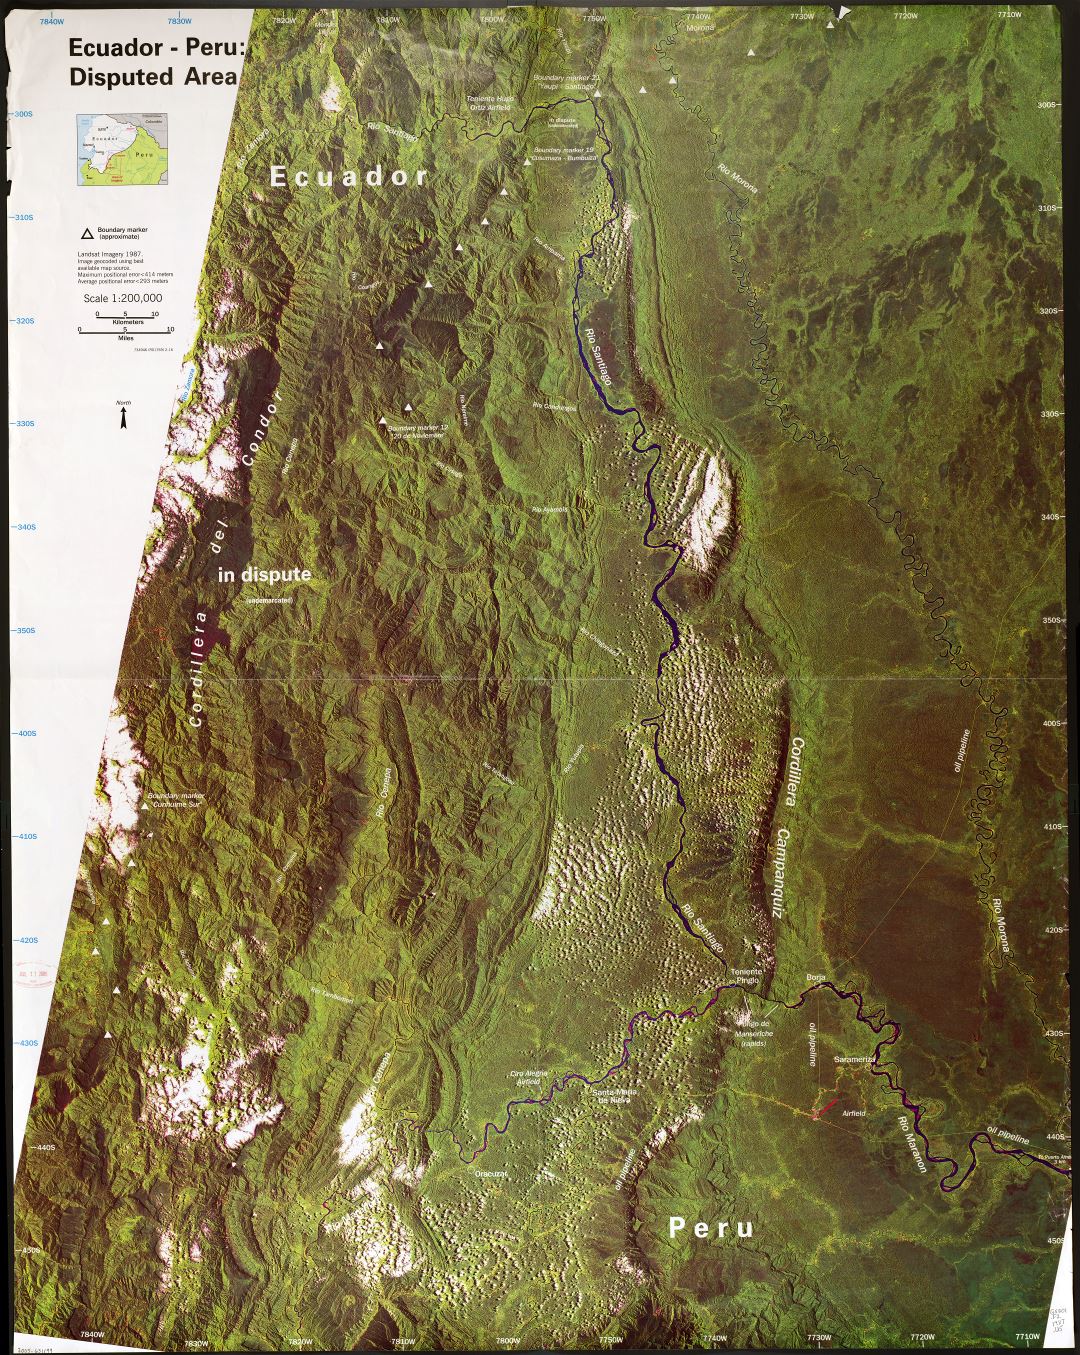 In high resolution detailed map of Ecuador - Peru disputed area - 1987